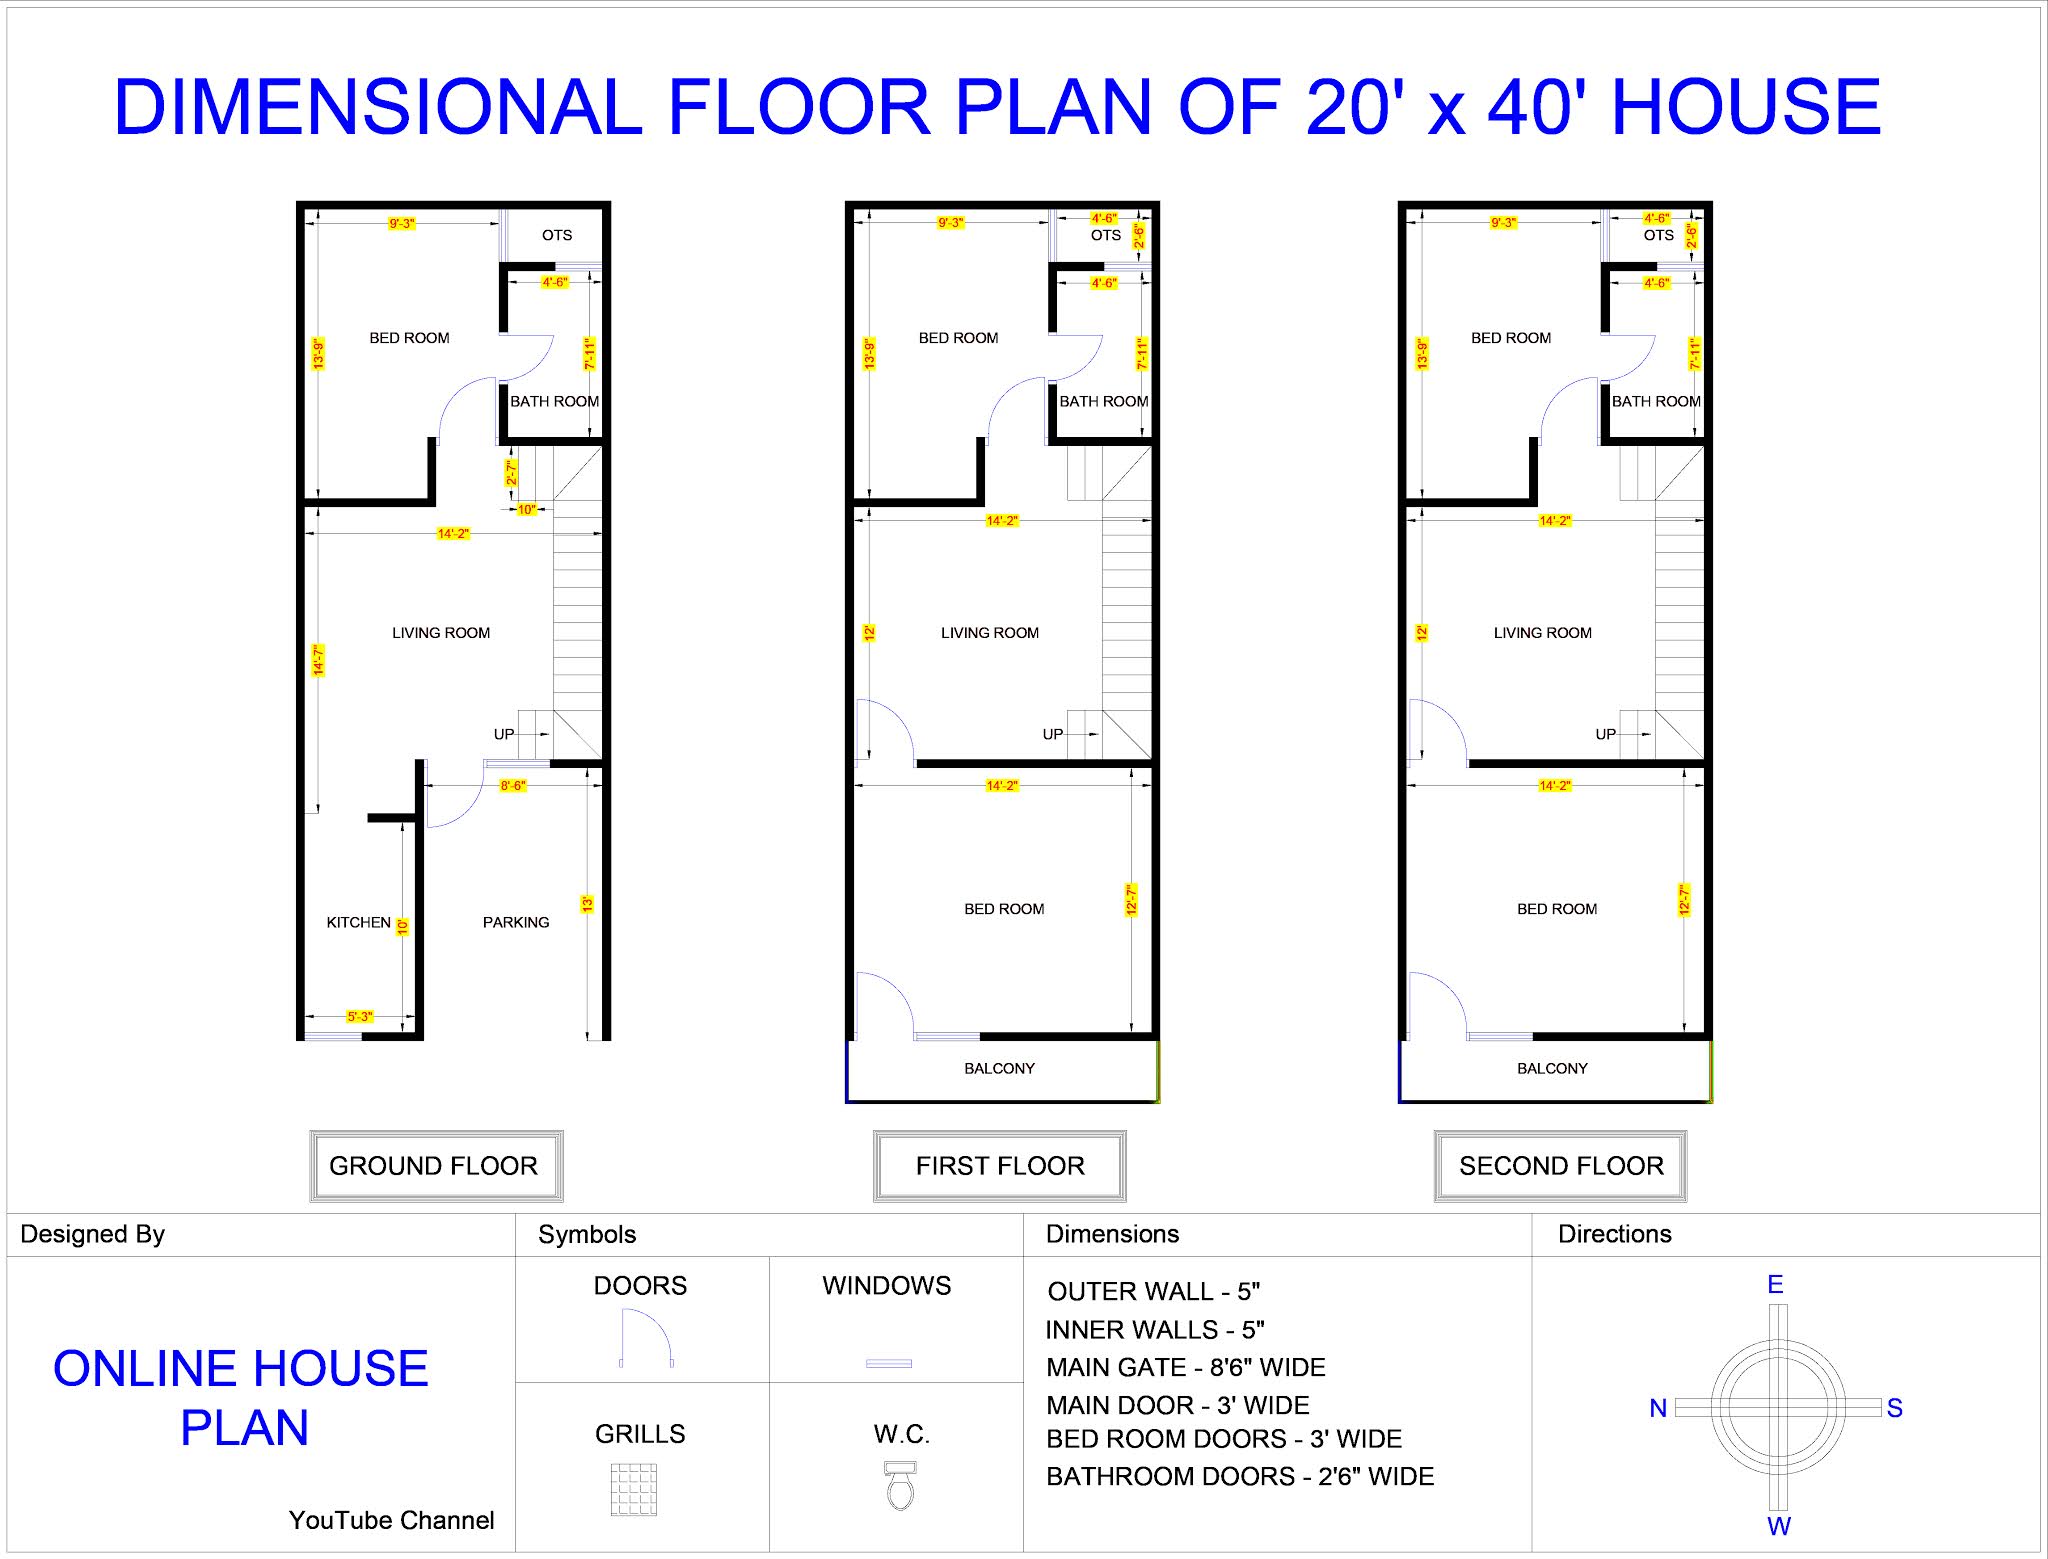 15'X40' House Design With Floor Plan And Elevation - Adobe BoX